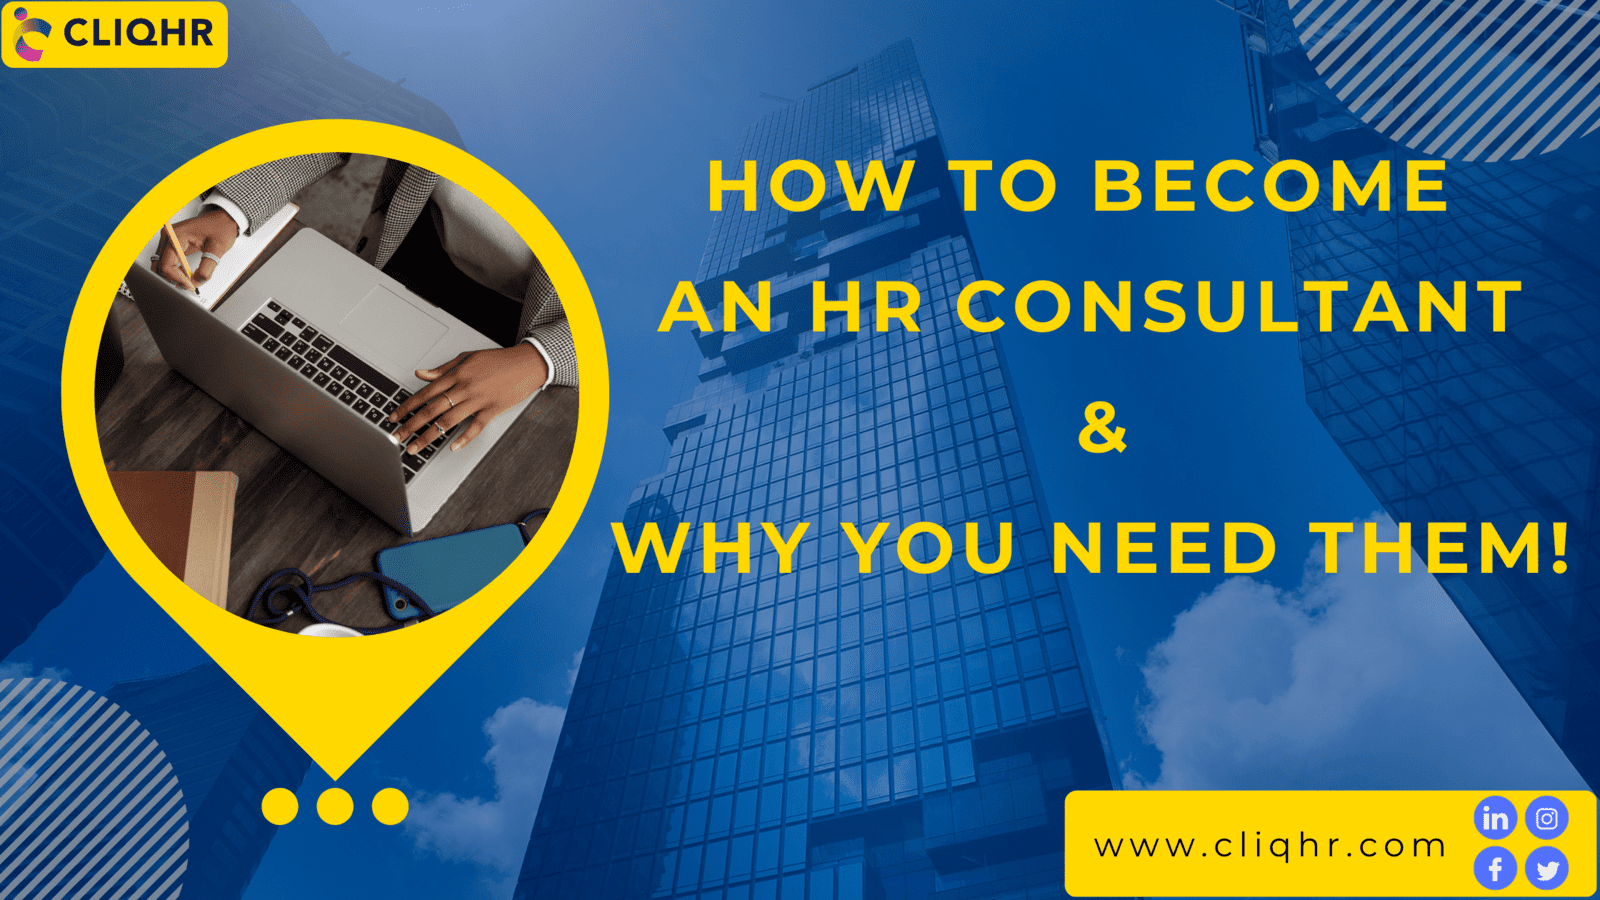 How to become an HR consultant and why you need them